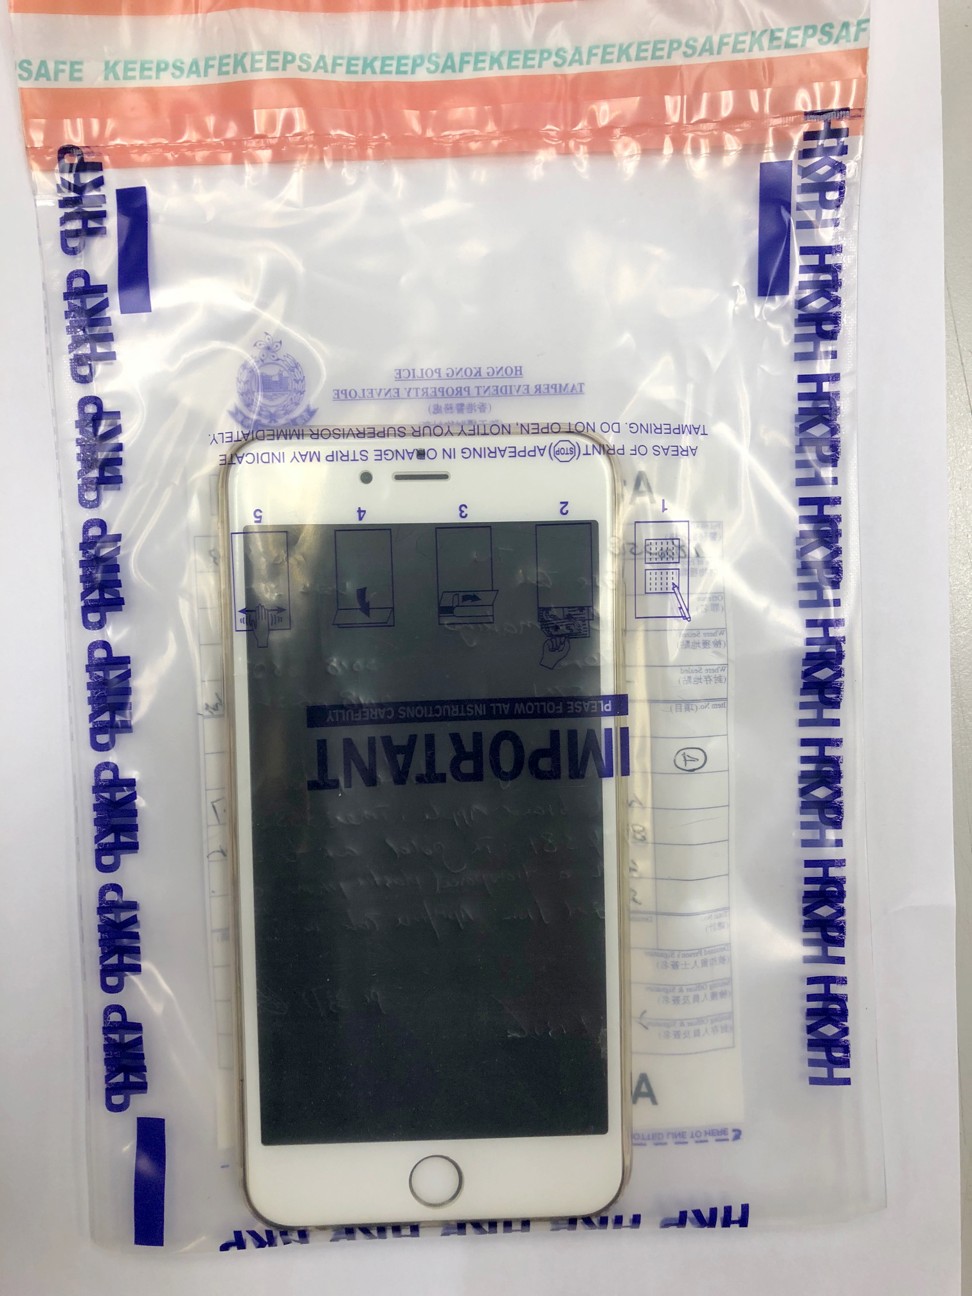 In the raid in Tsuen Wan, police found HK$1.9 million in illegal soccer betting records stored in a mobile phone. Photo: Handout